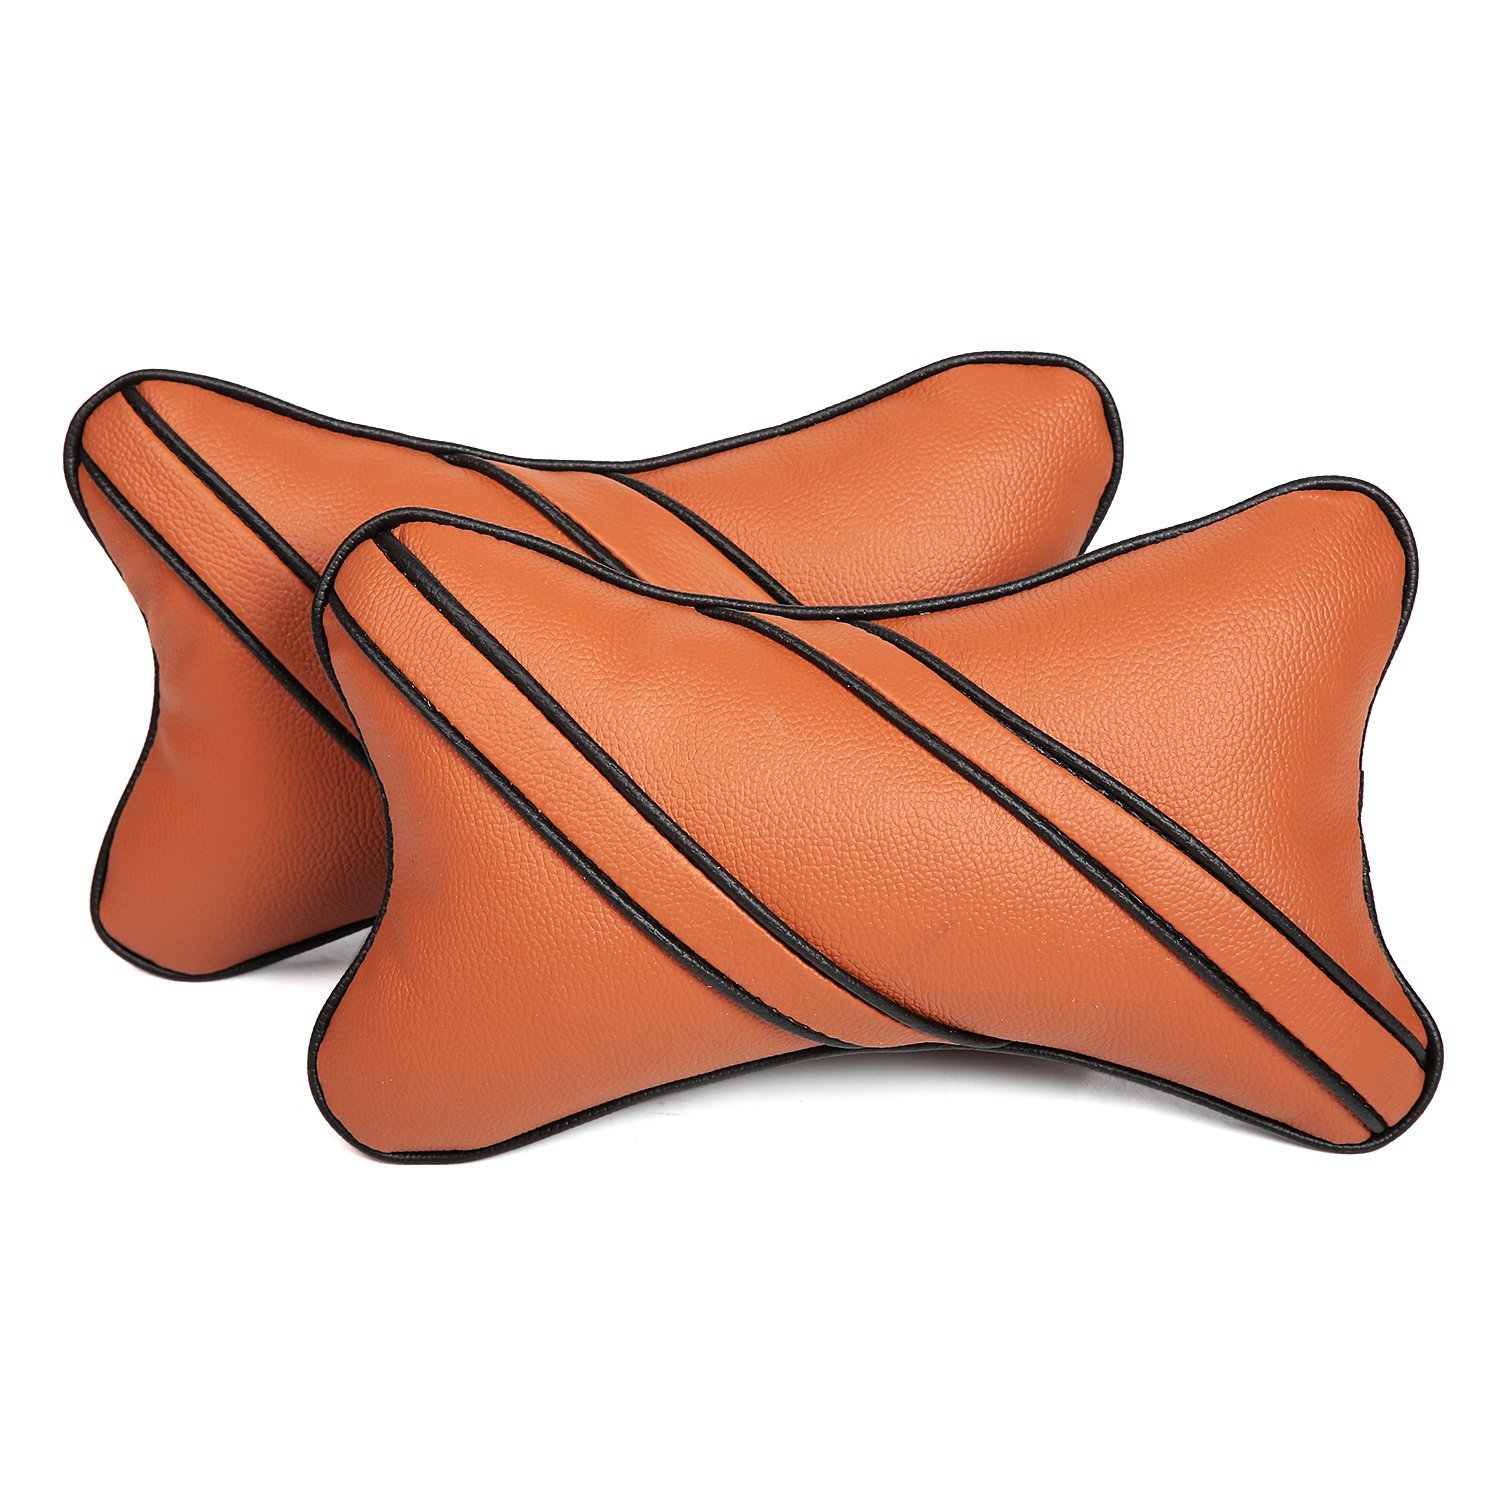 Neck Rest Pillow in Tan and Black